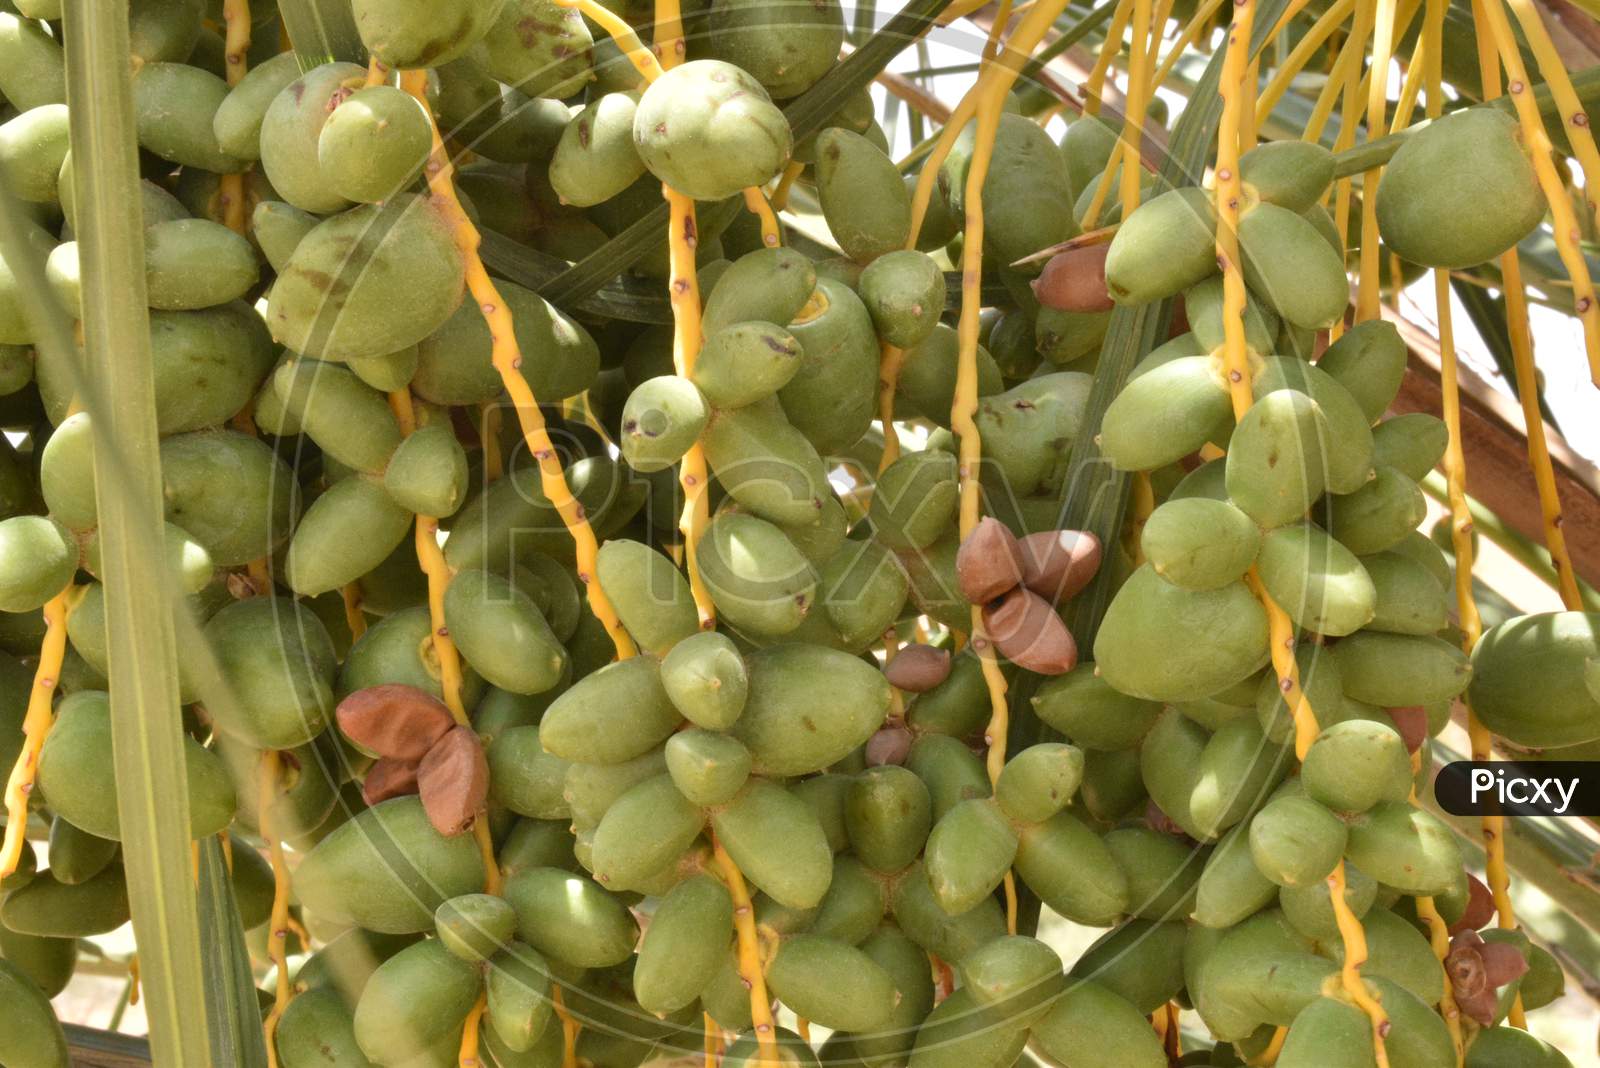 Green Dates Palm Fruit With Branches On Dates Palm Tree.Starting Stage Of The Date Fruit.